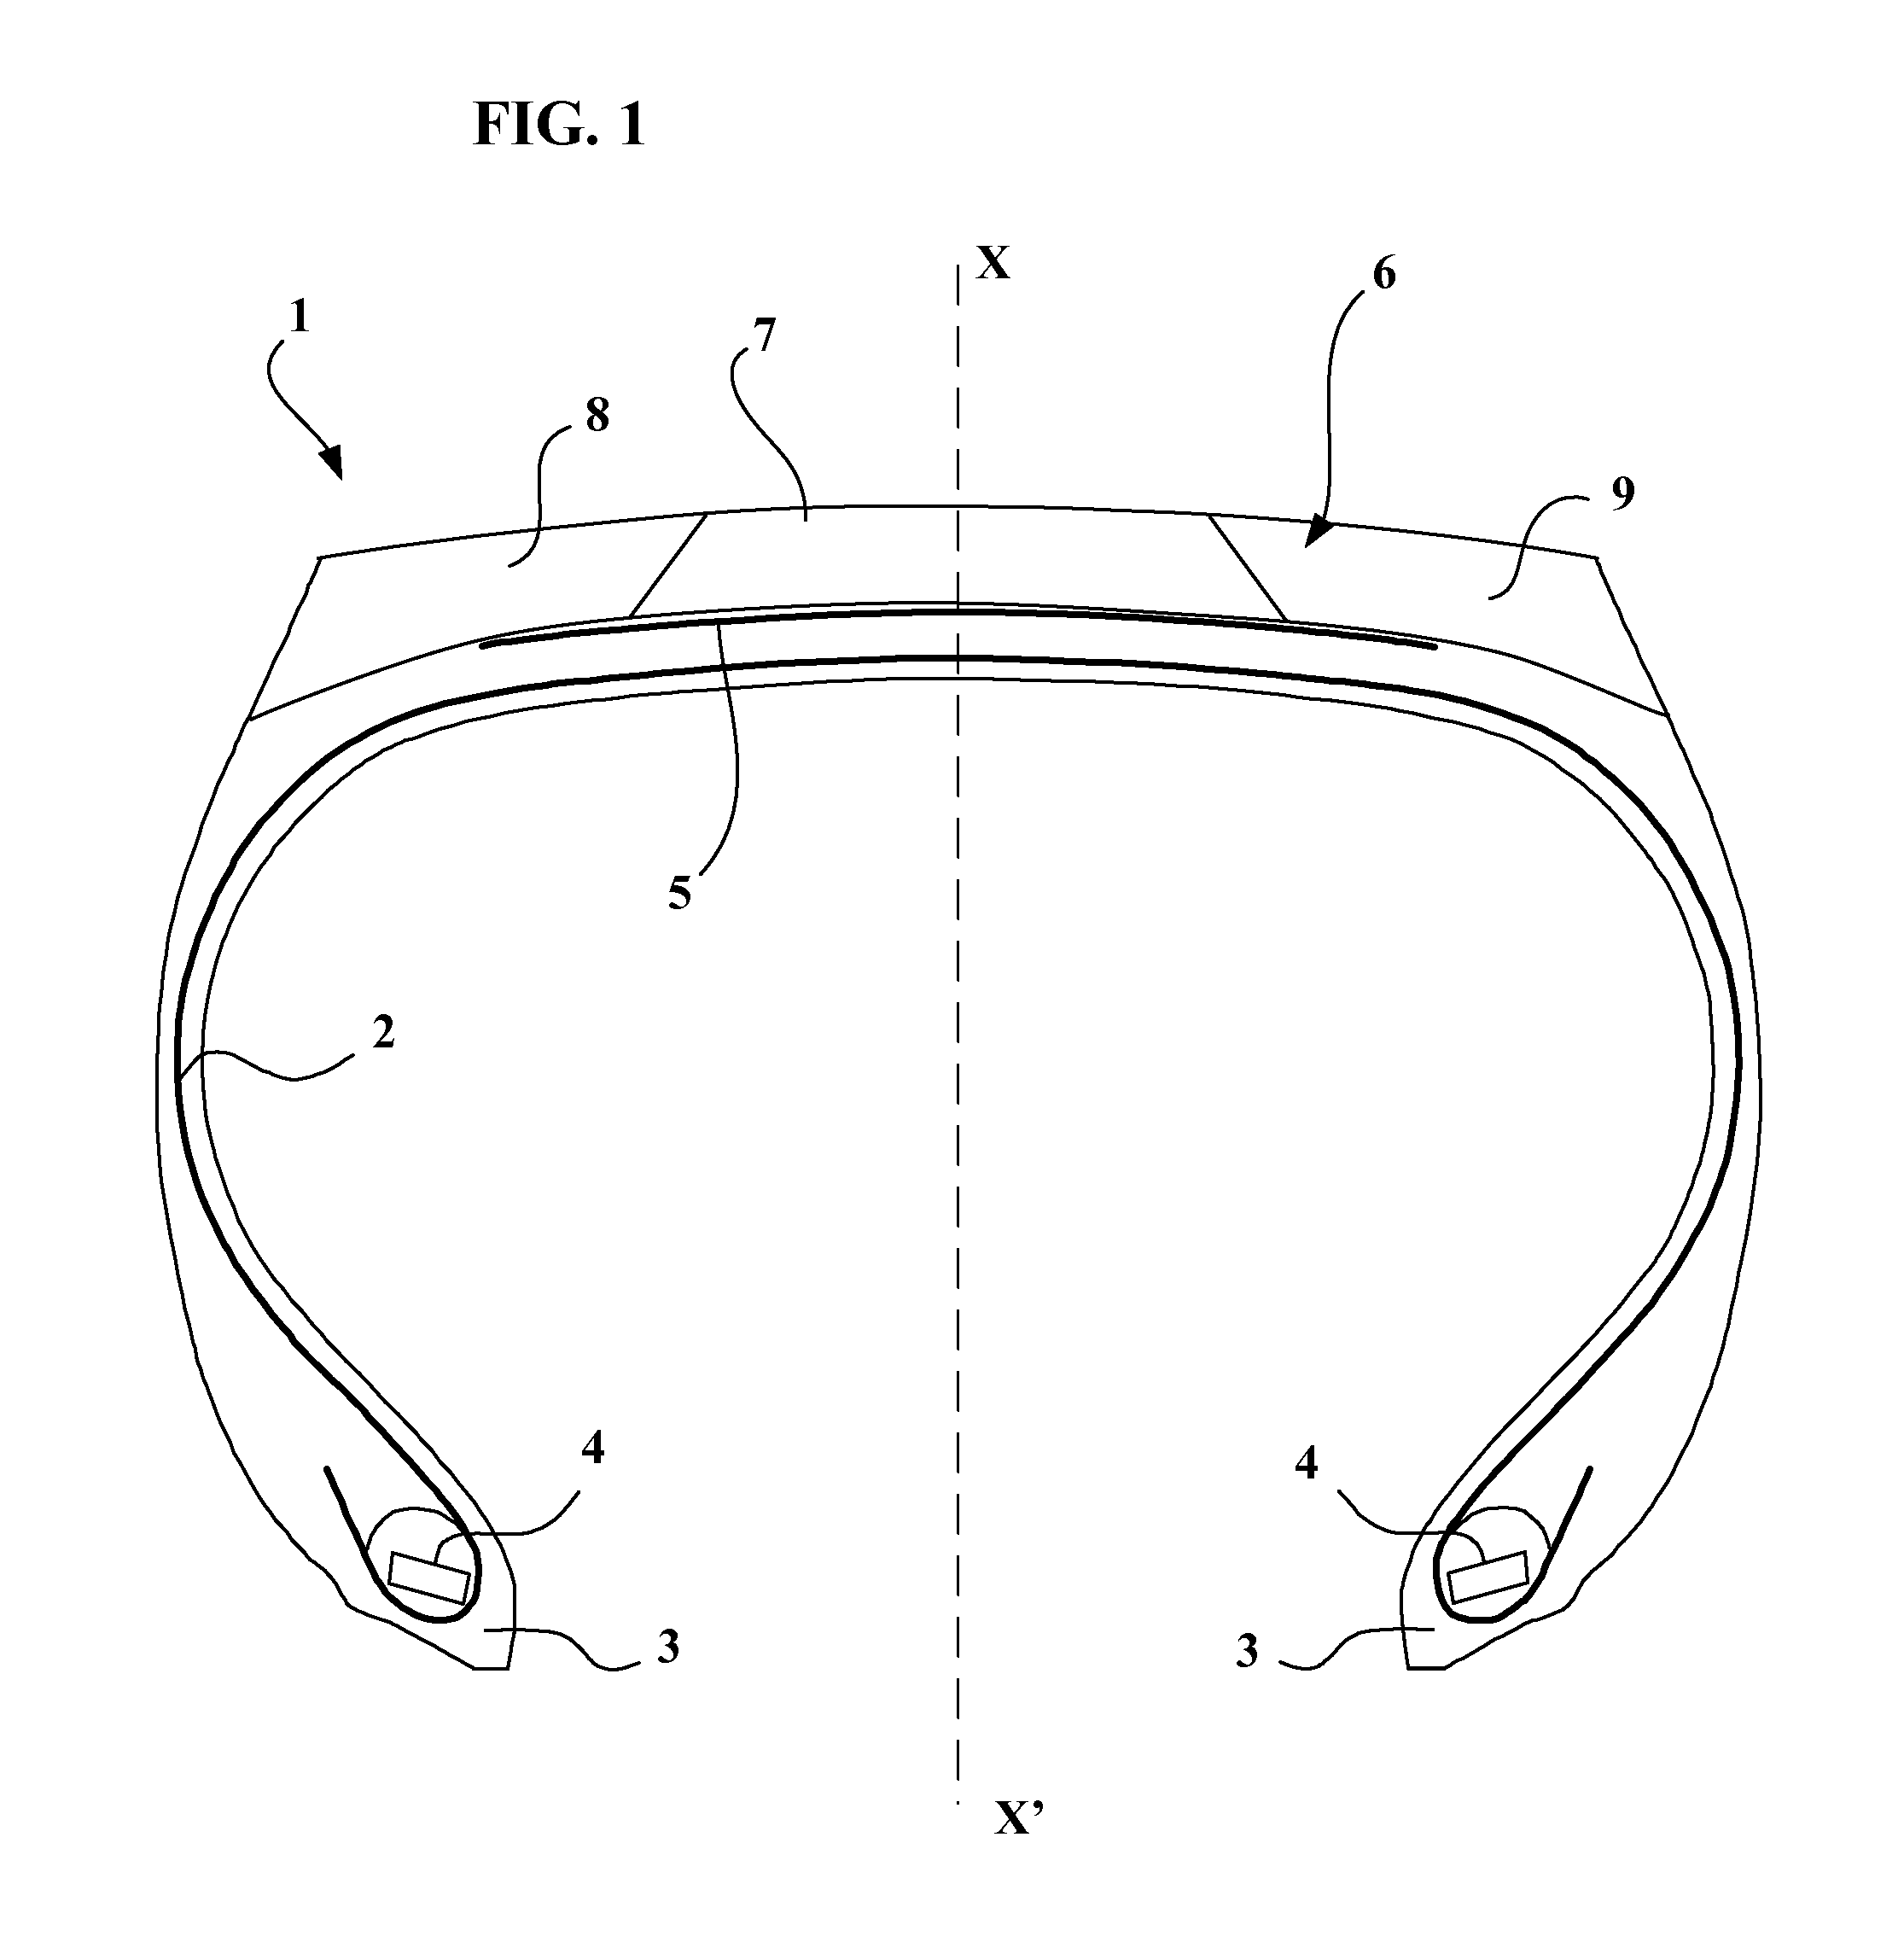 Tire comprising a tread formed by multiple elastomer blends